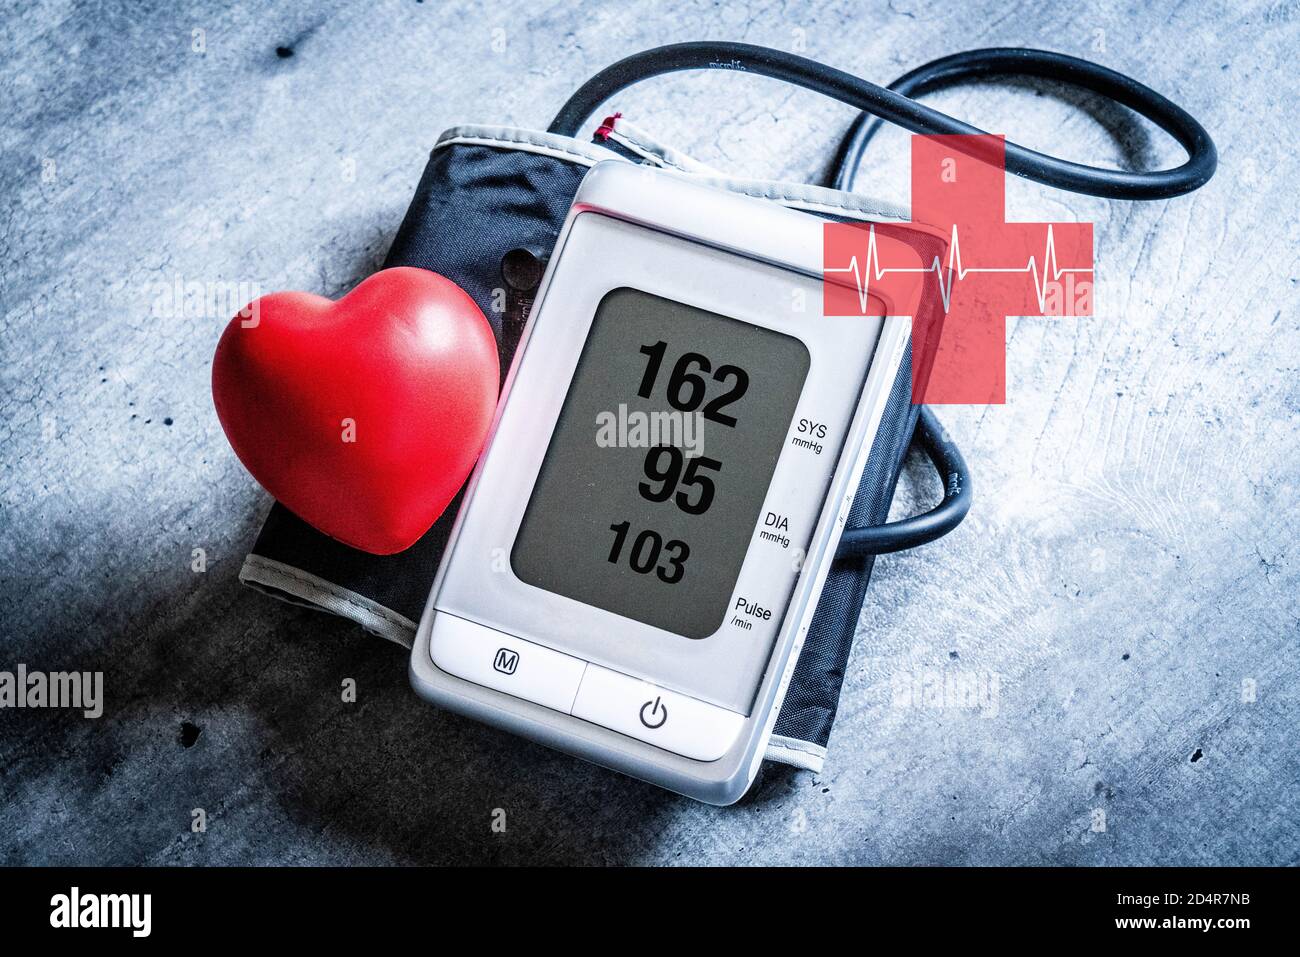 Plastic hearts and tensiometer. Stock Photo